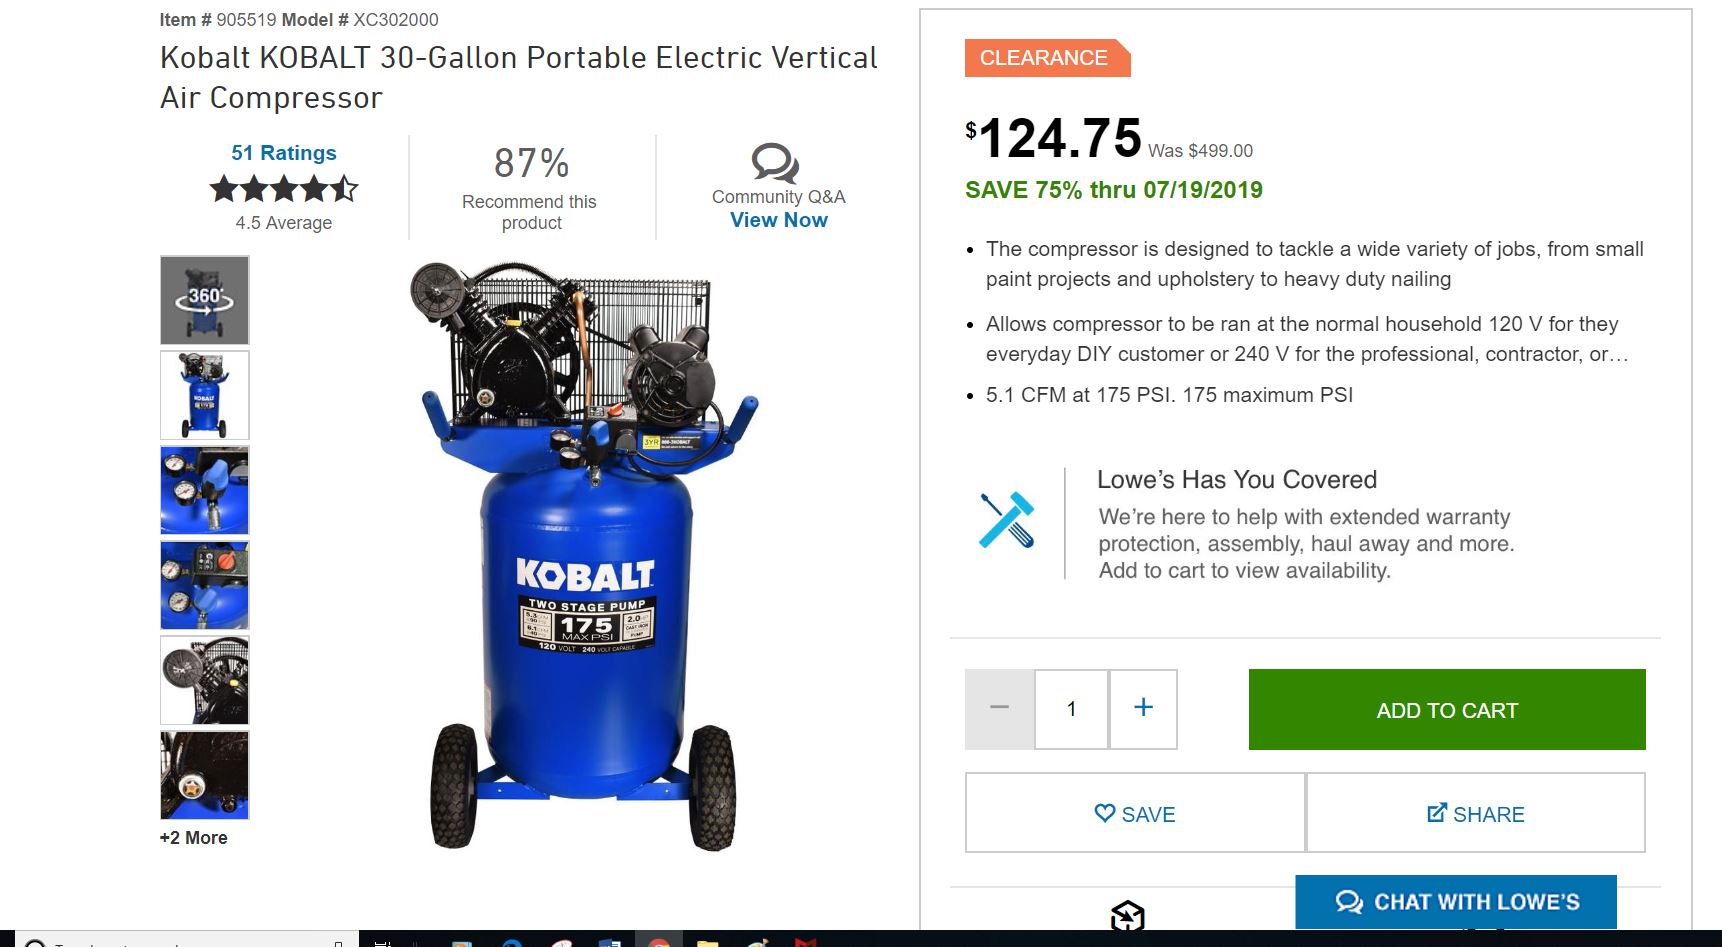 KOBALT 30-Gallon Portable Electric Vertical Air Compressor Clearance at Lowes 124.75 YMMV $124.75